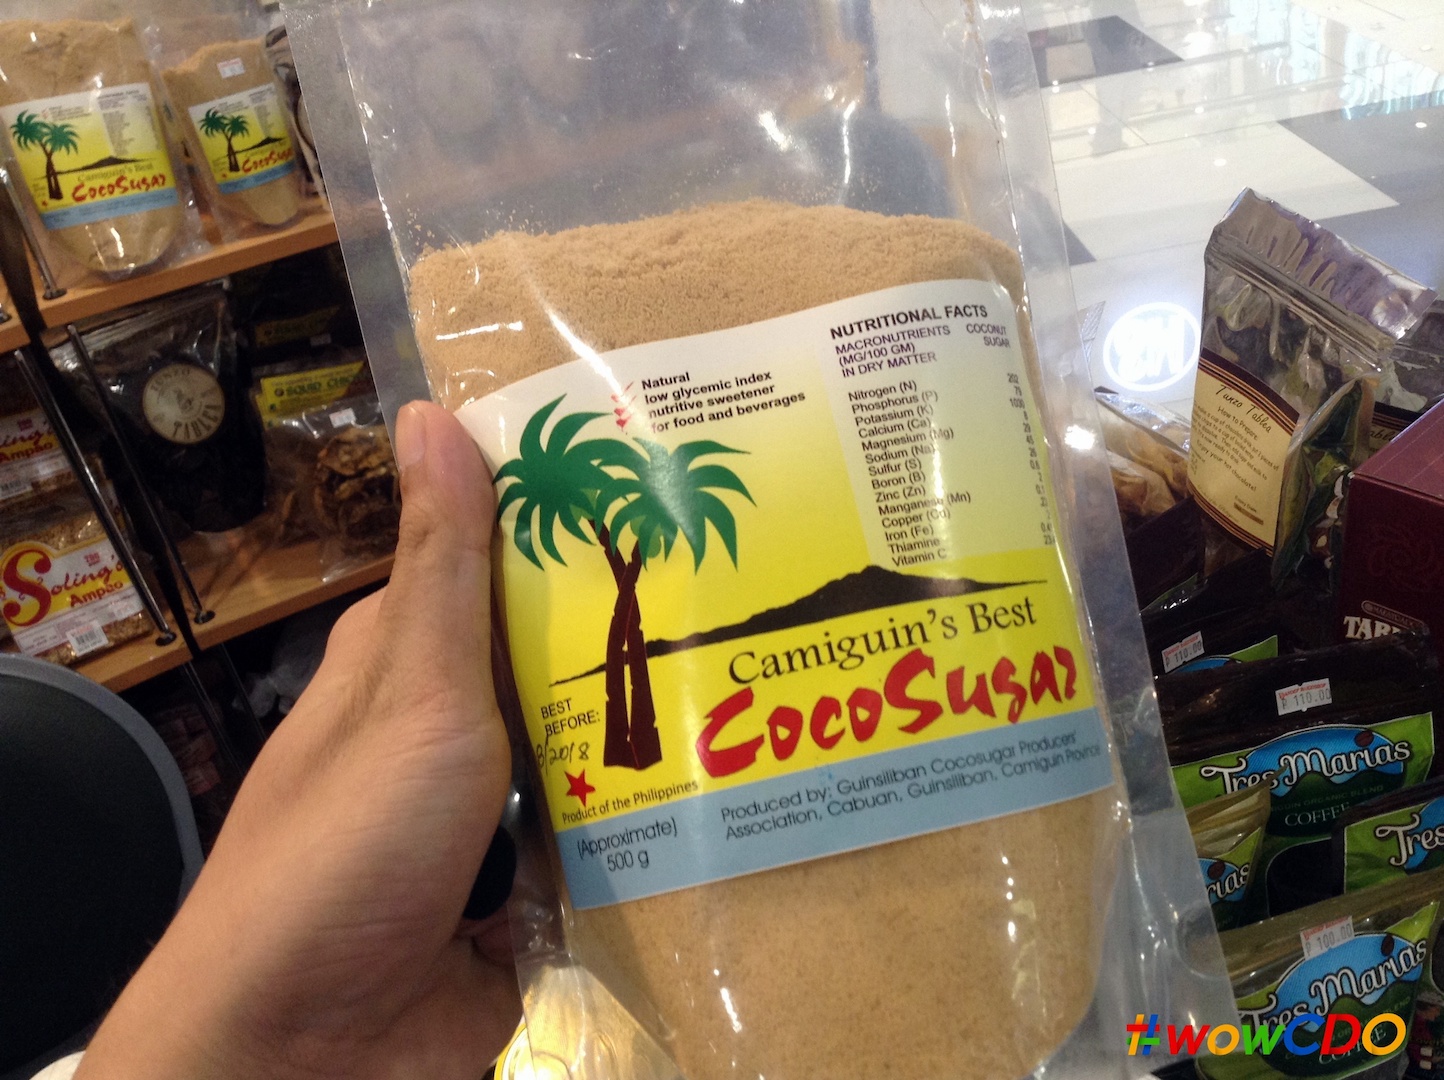 It Took 3 Attempts to Make Camiguin’s Best Coco Sugar